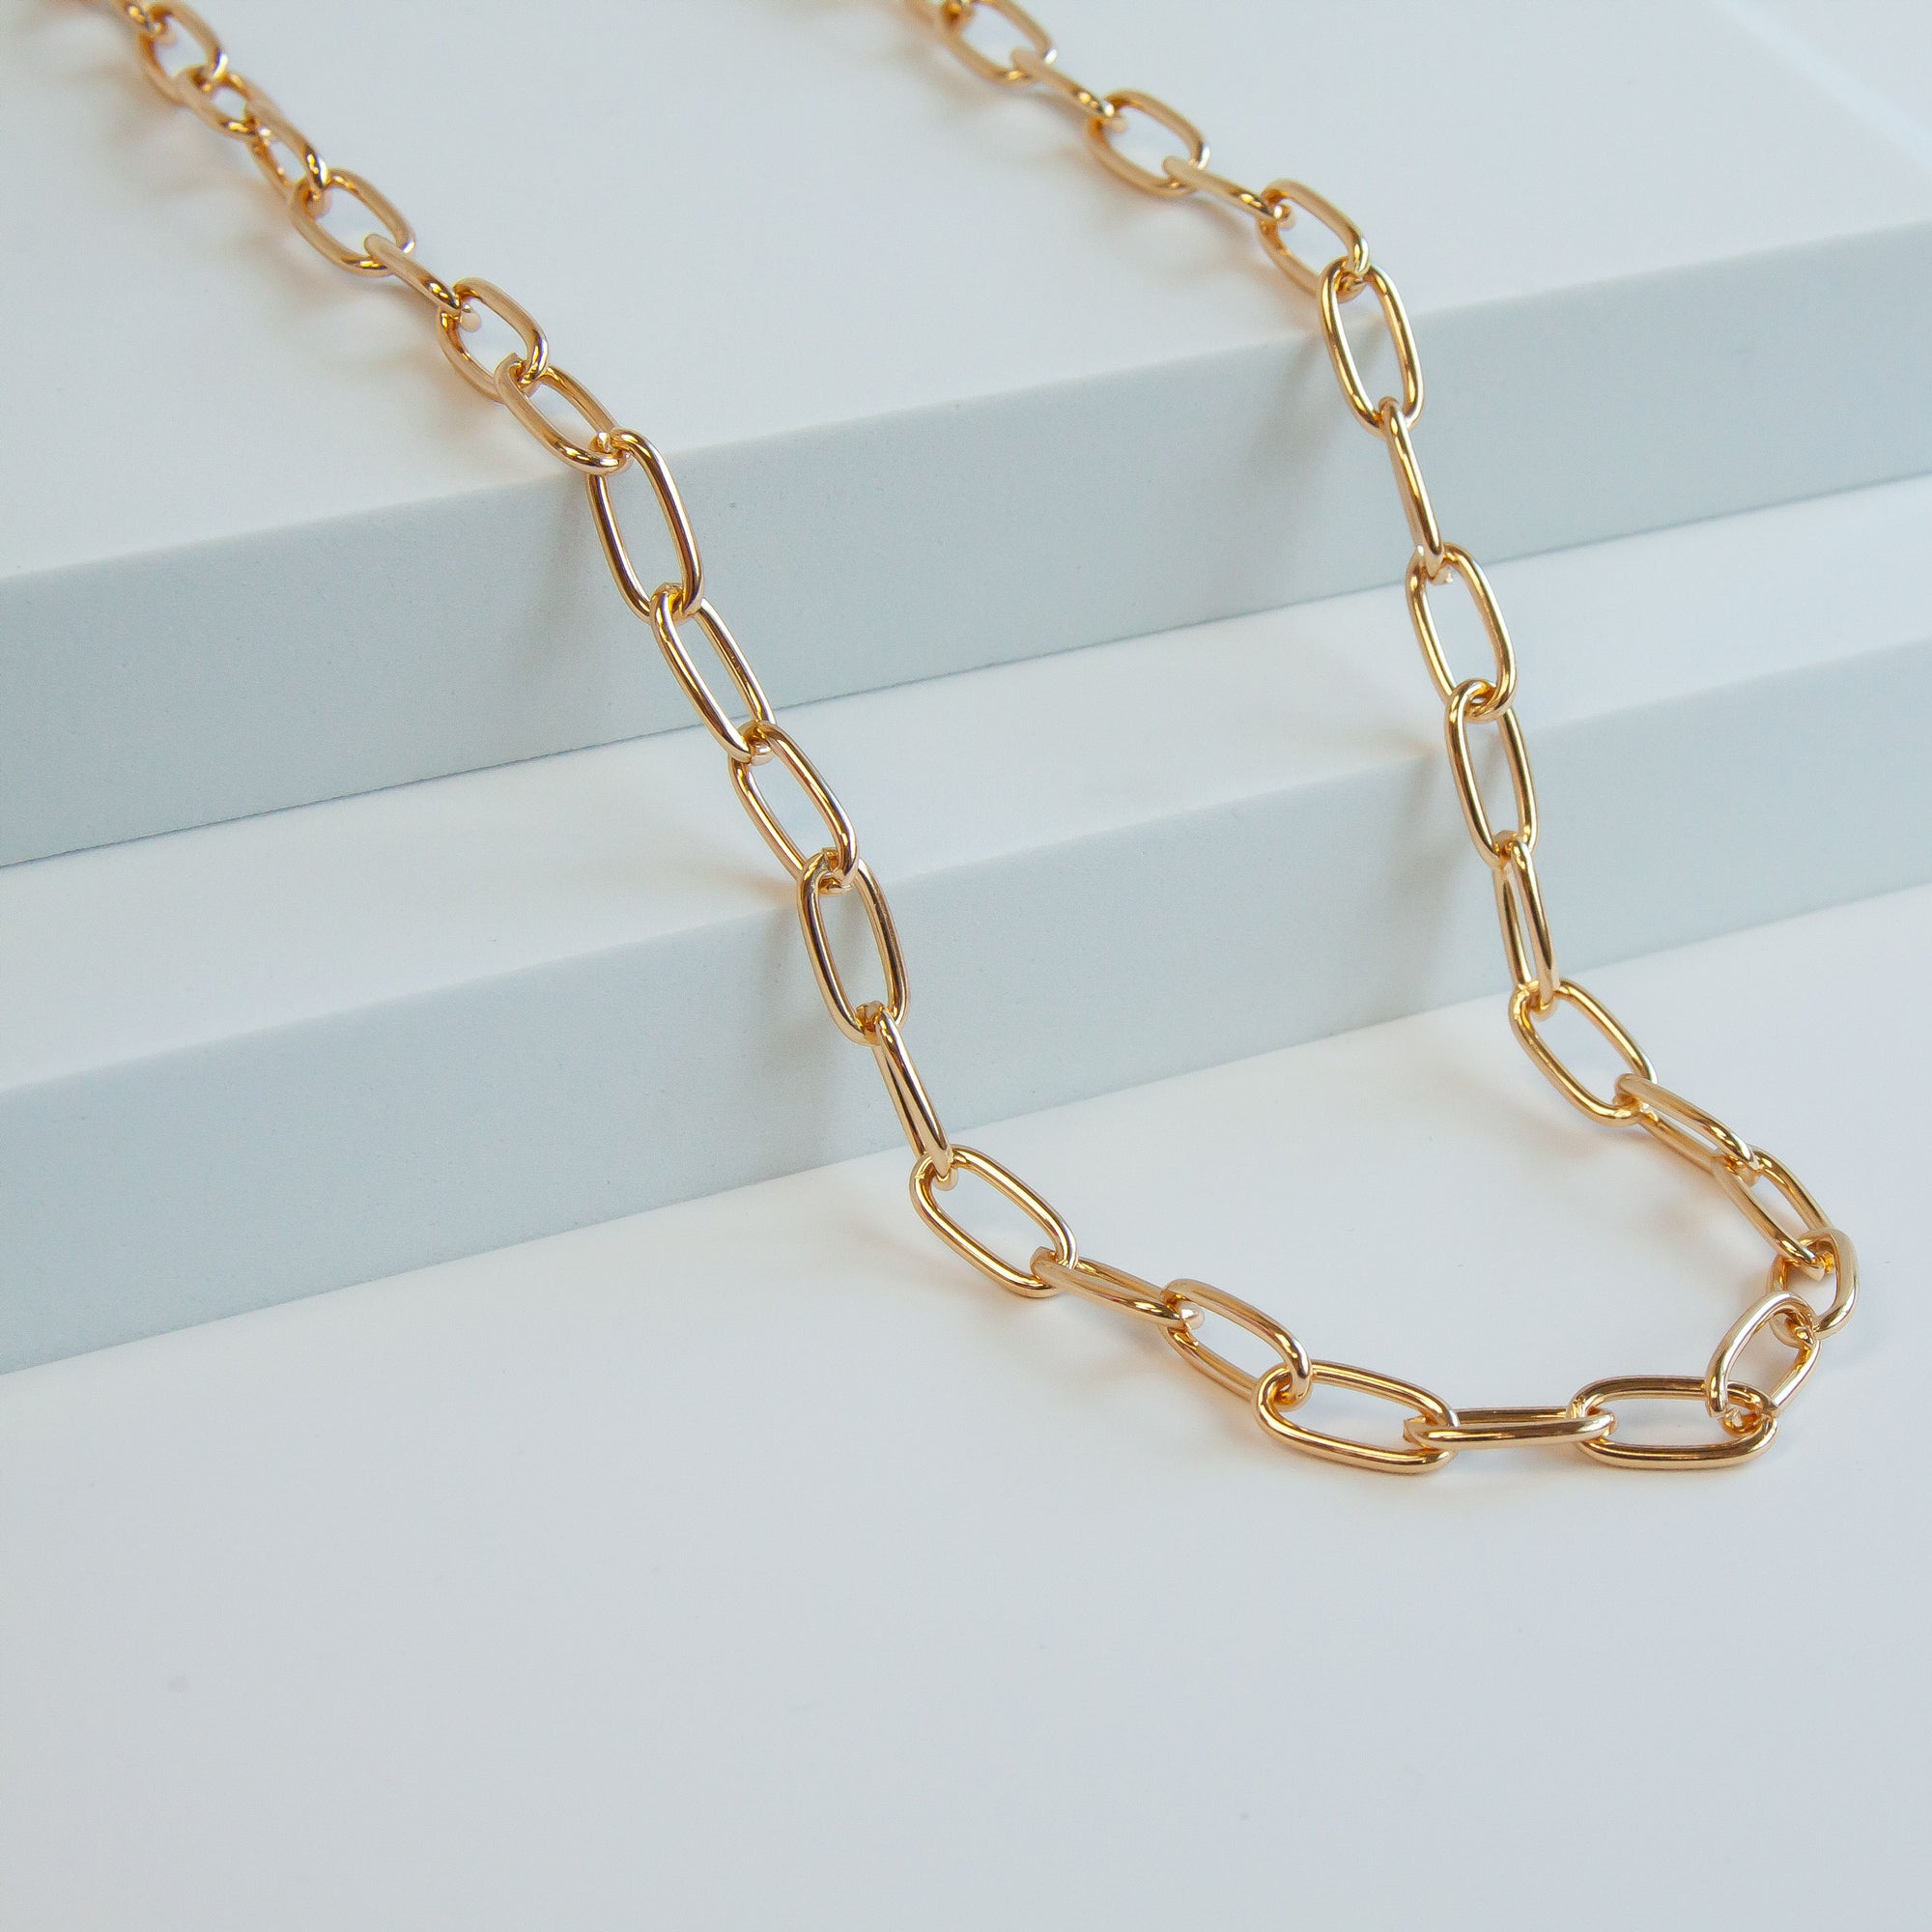 Charles Albert Jewelry - Gold Tone Base Metal Paperclip Chain with Lobster Claw Clasp